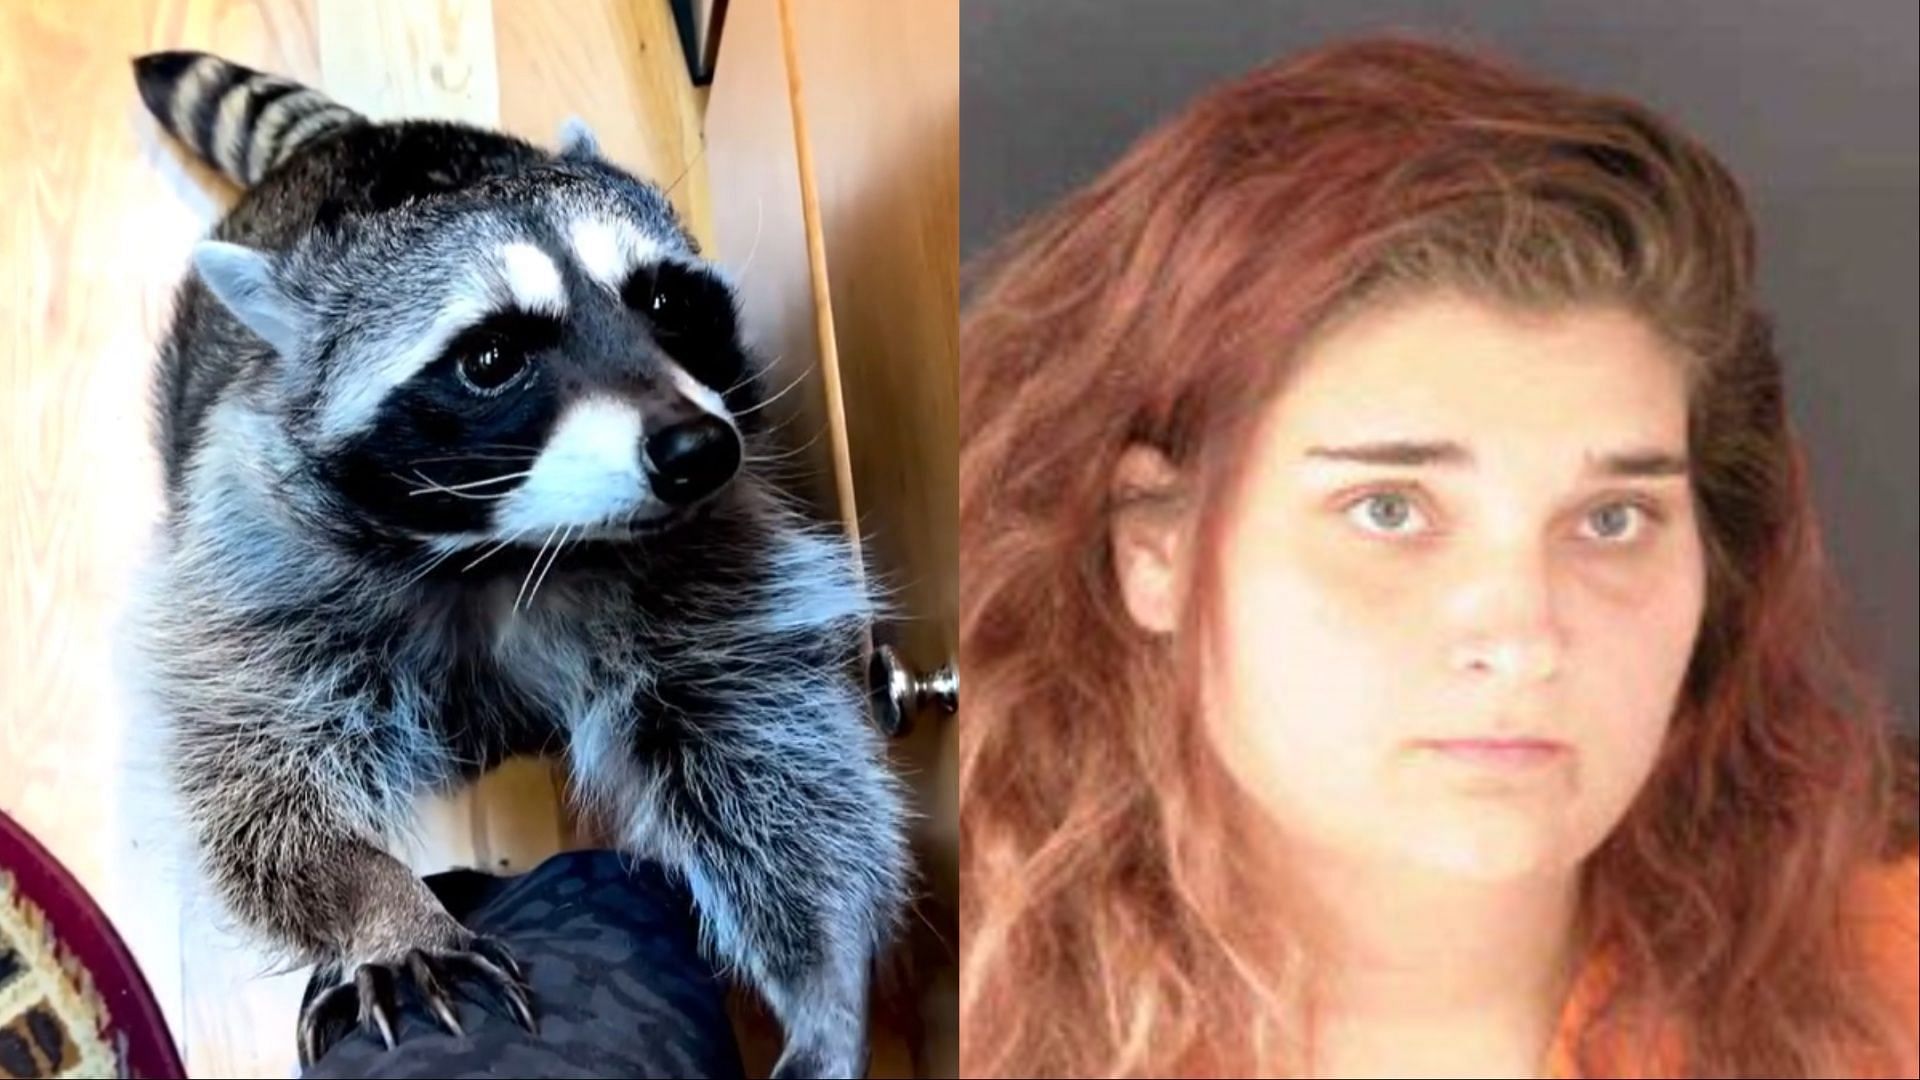 Petition receives thousands of signature after Alicia Kincheloe only gets sentenced to work program after torturing animal (Image via awesome.raccoon/Instagram and LPaulKang/X)  